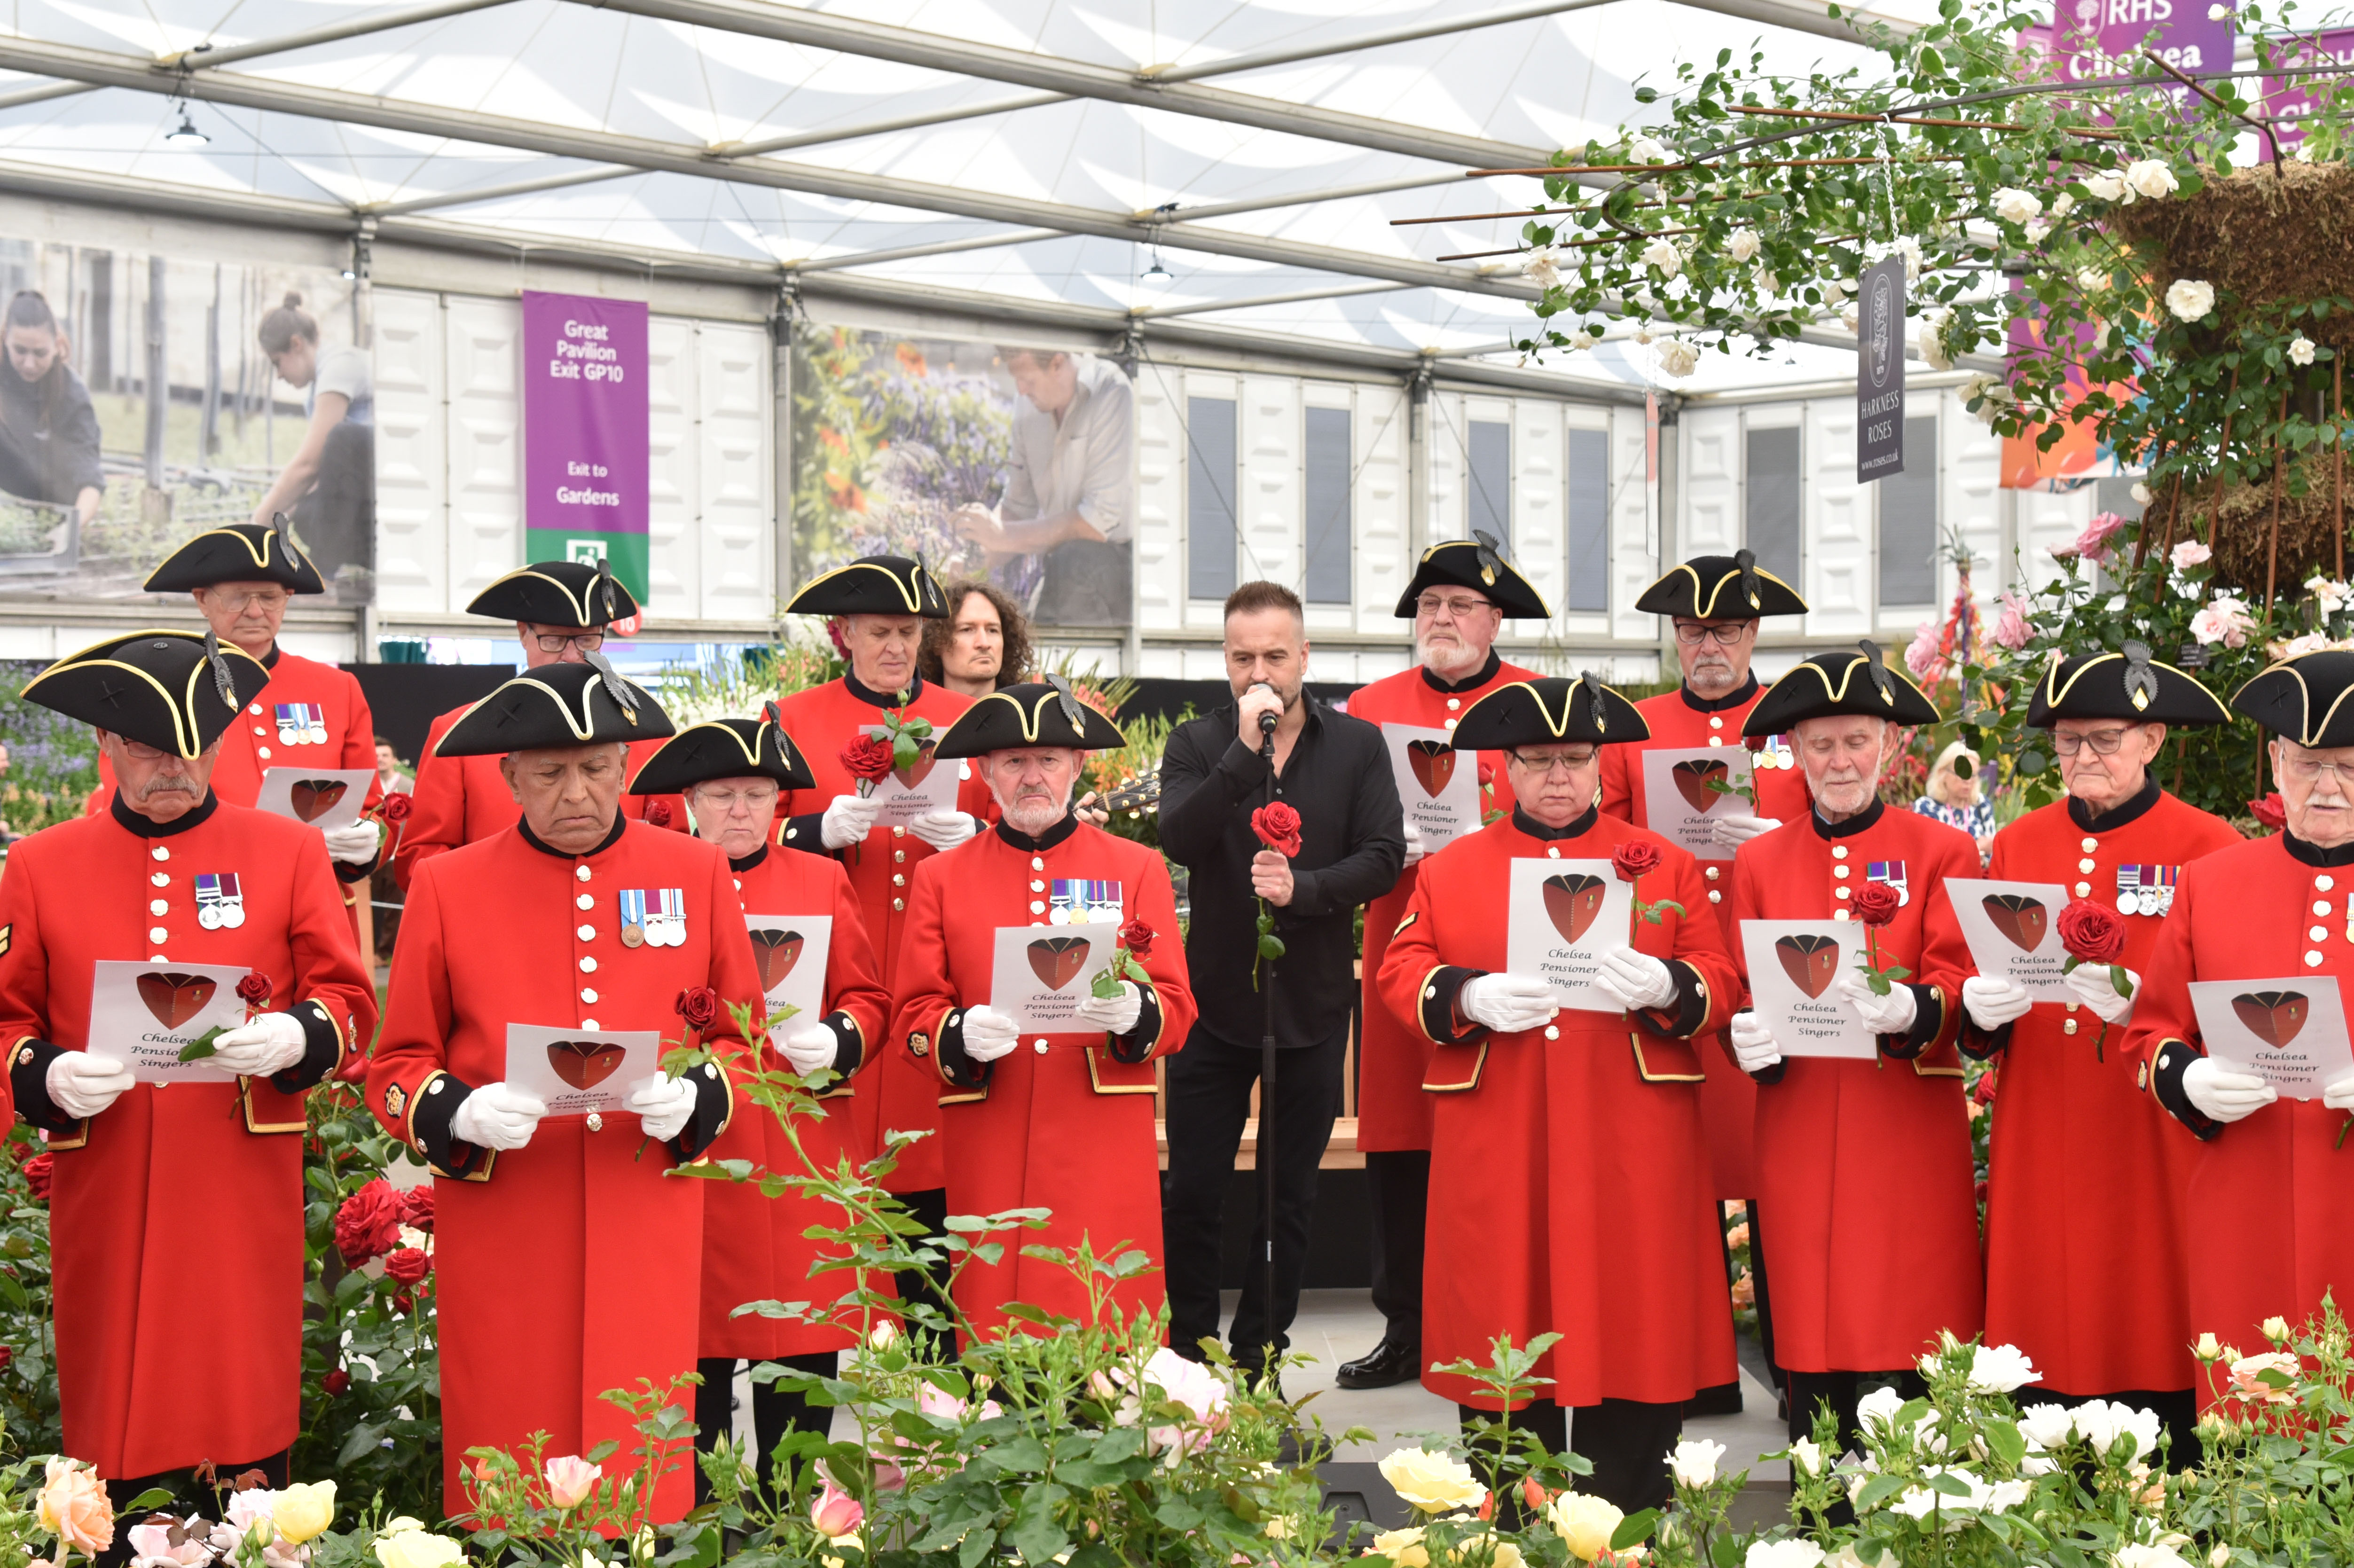 Chelsea pensioner singing group in scarlet coat and tricorne hat singing with Alfie Boe surrounded by red roses